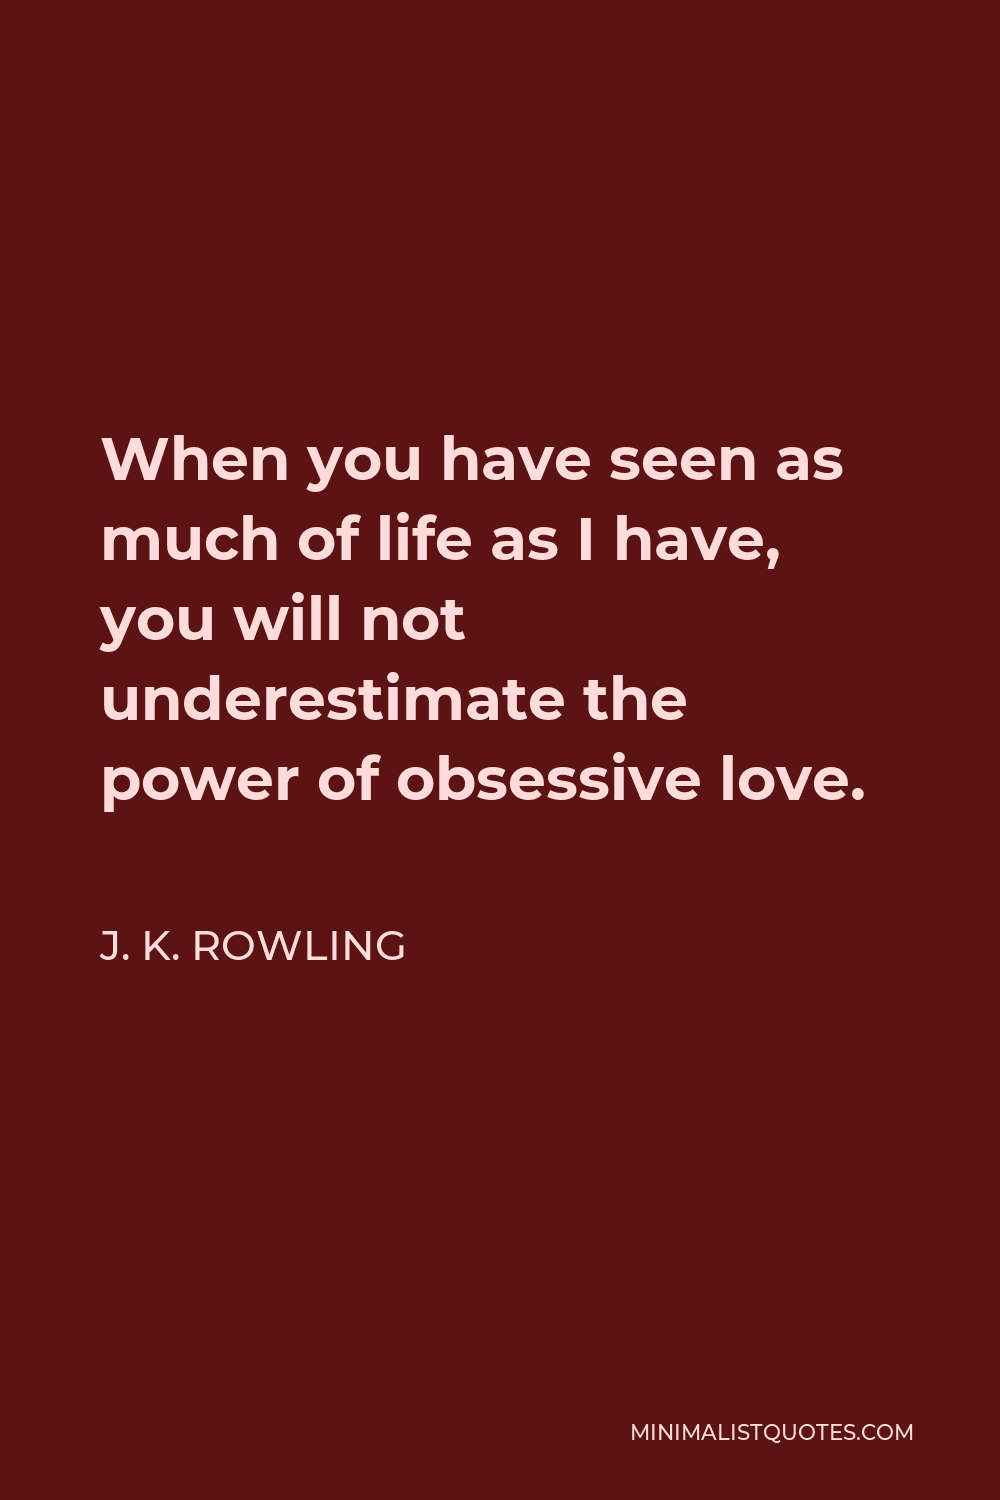 J. K. Rowling Quote - When you have seen as much of life as I have, you will not underestimate the power of obsessive love.